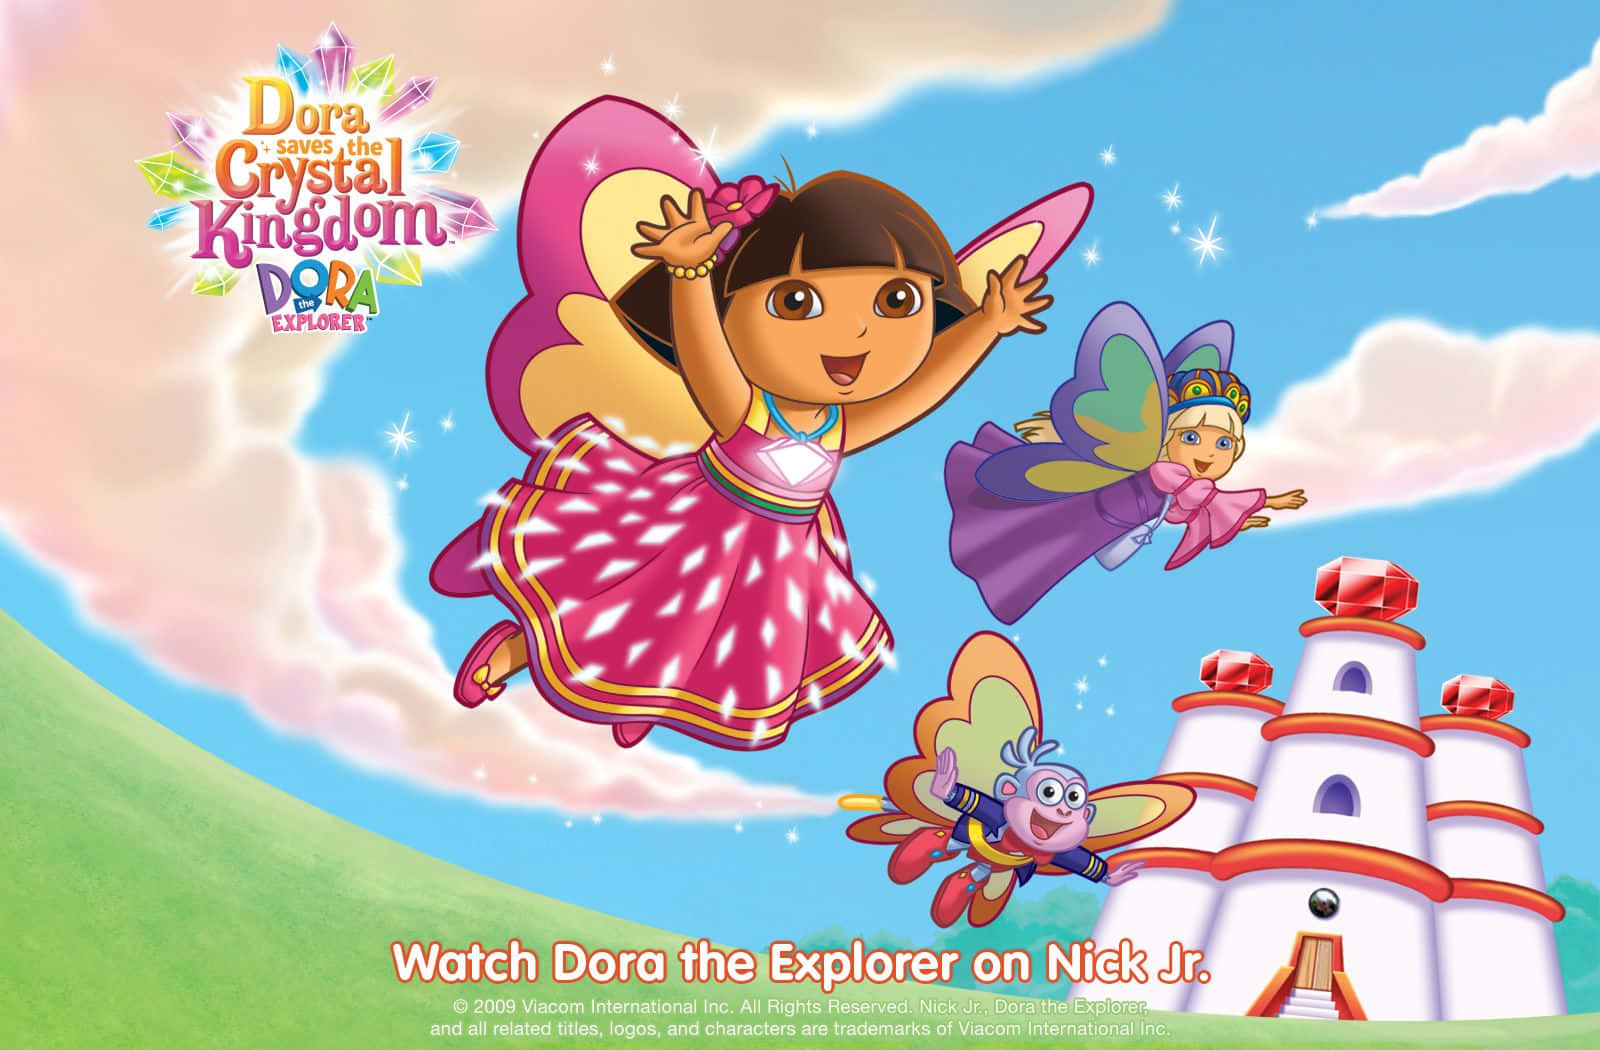 A magical journey with Dora!